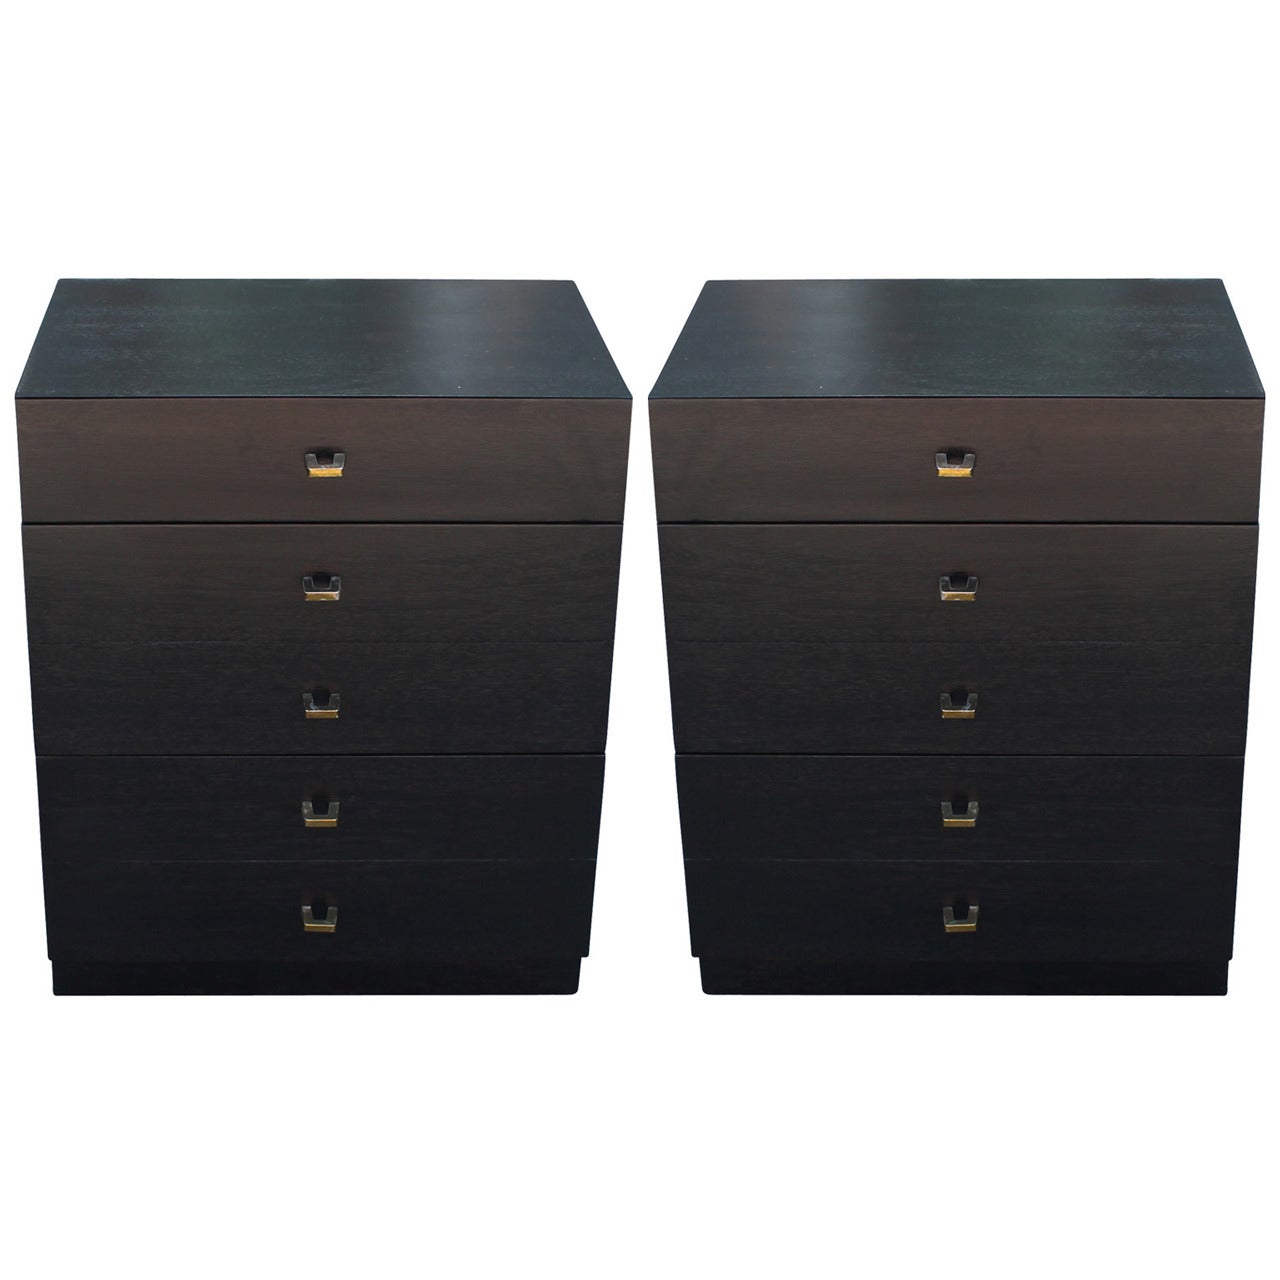 Pair of Ebonized Nightstands by American of Martinsville